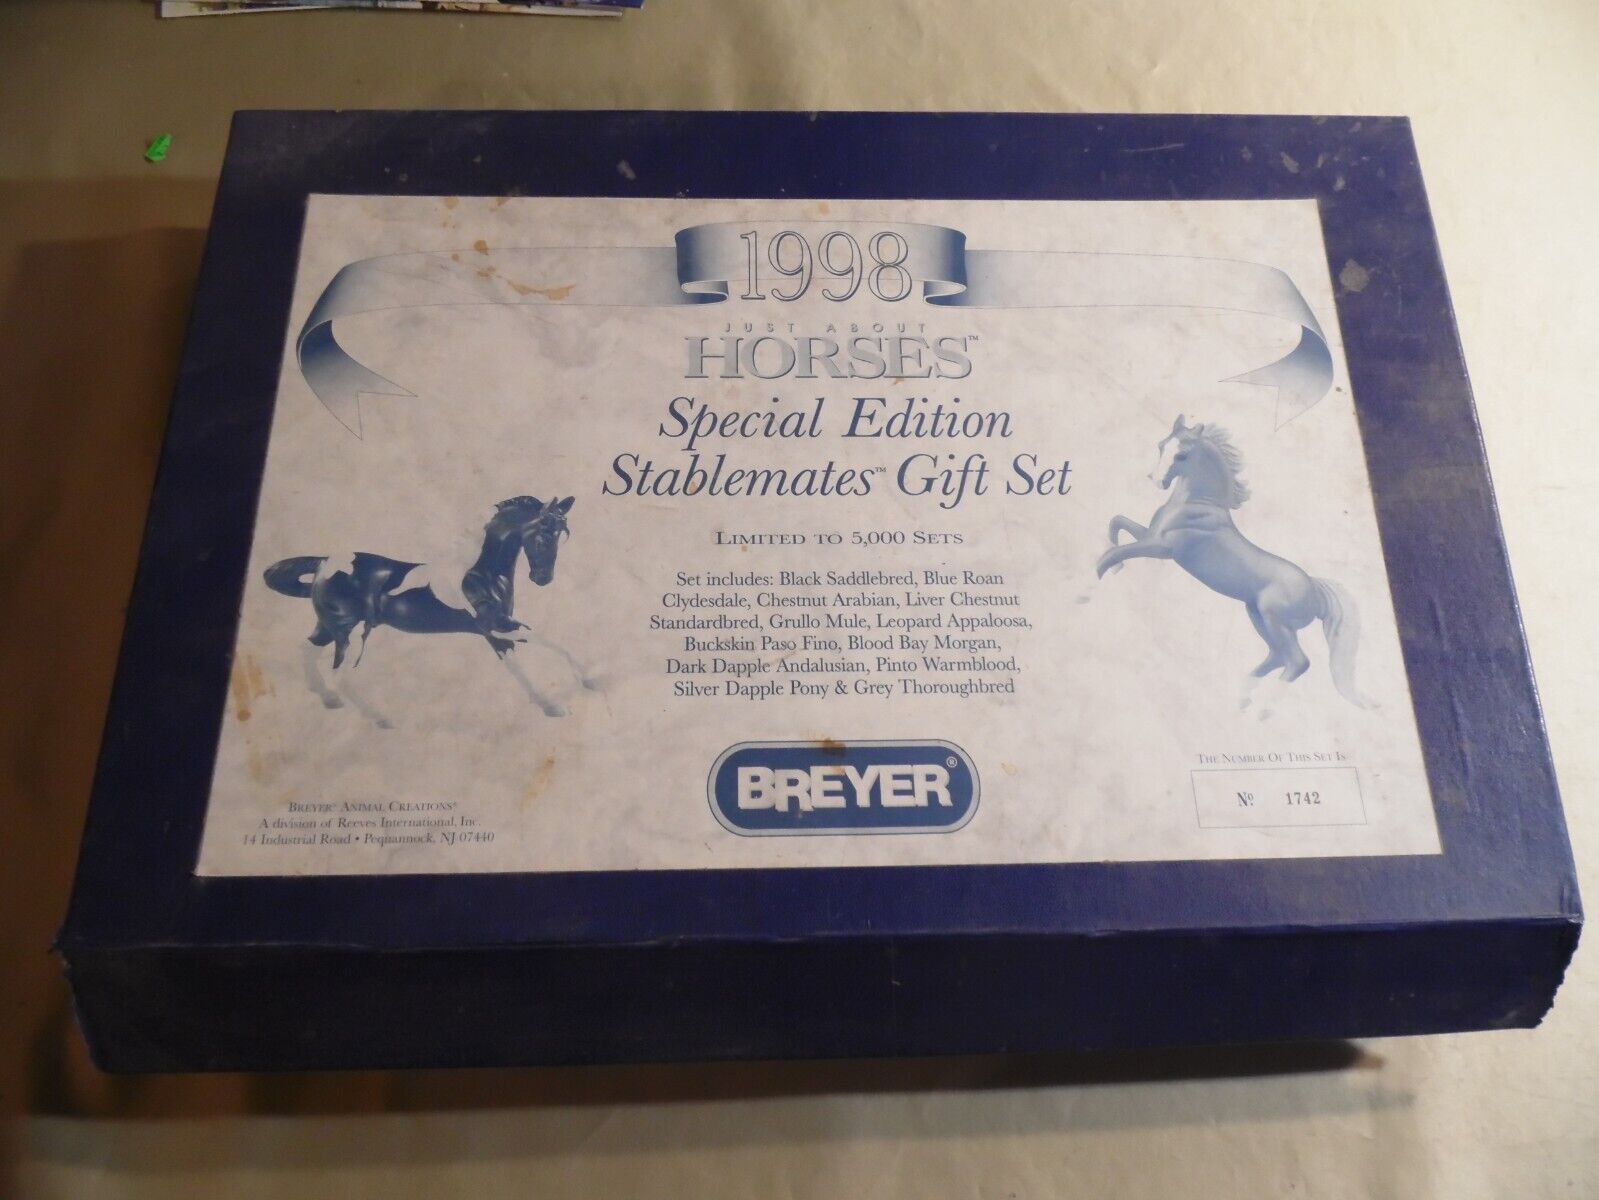 Breyer 1998 Just About Horses Special Edition Stablemates Gift Set / See Pics